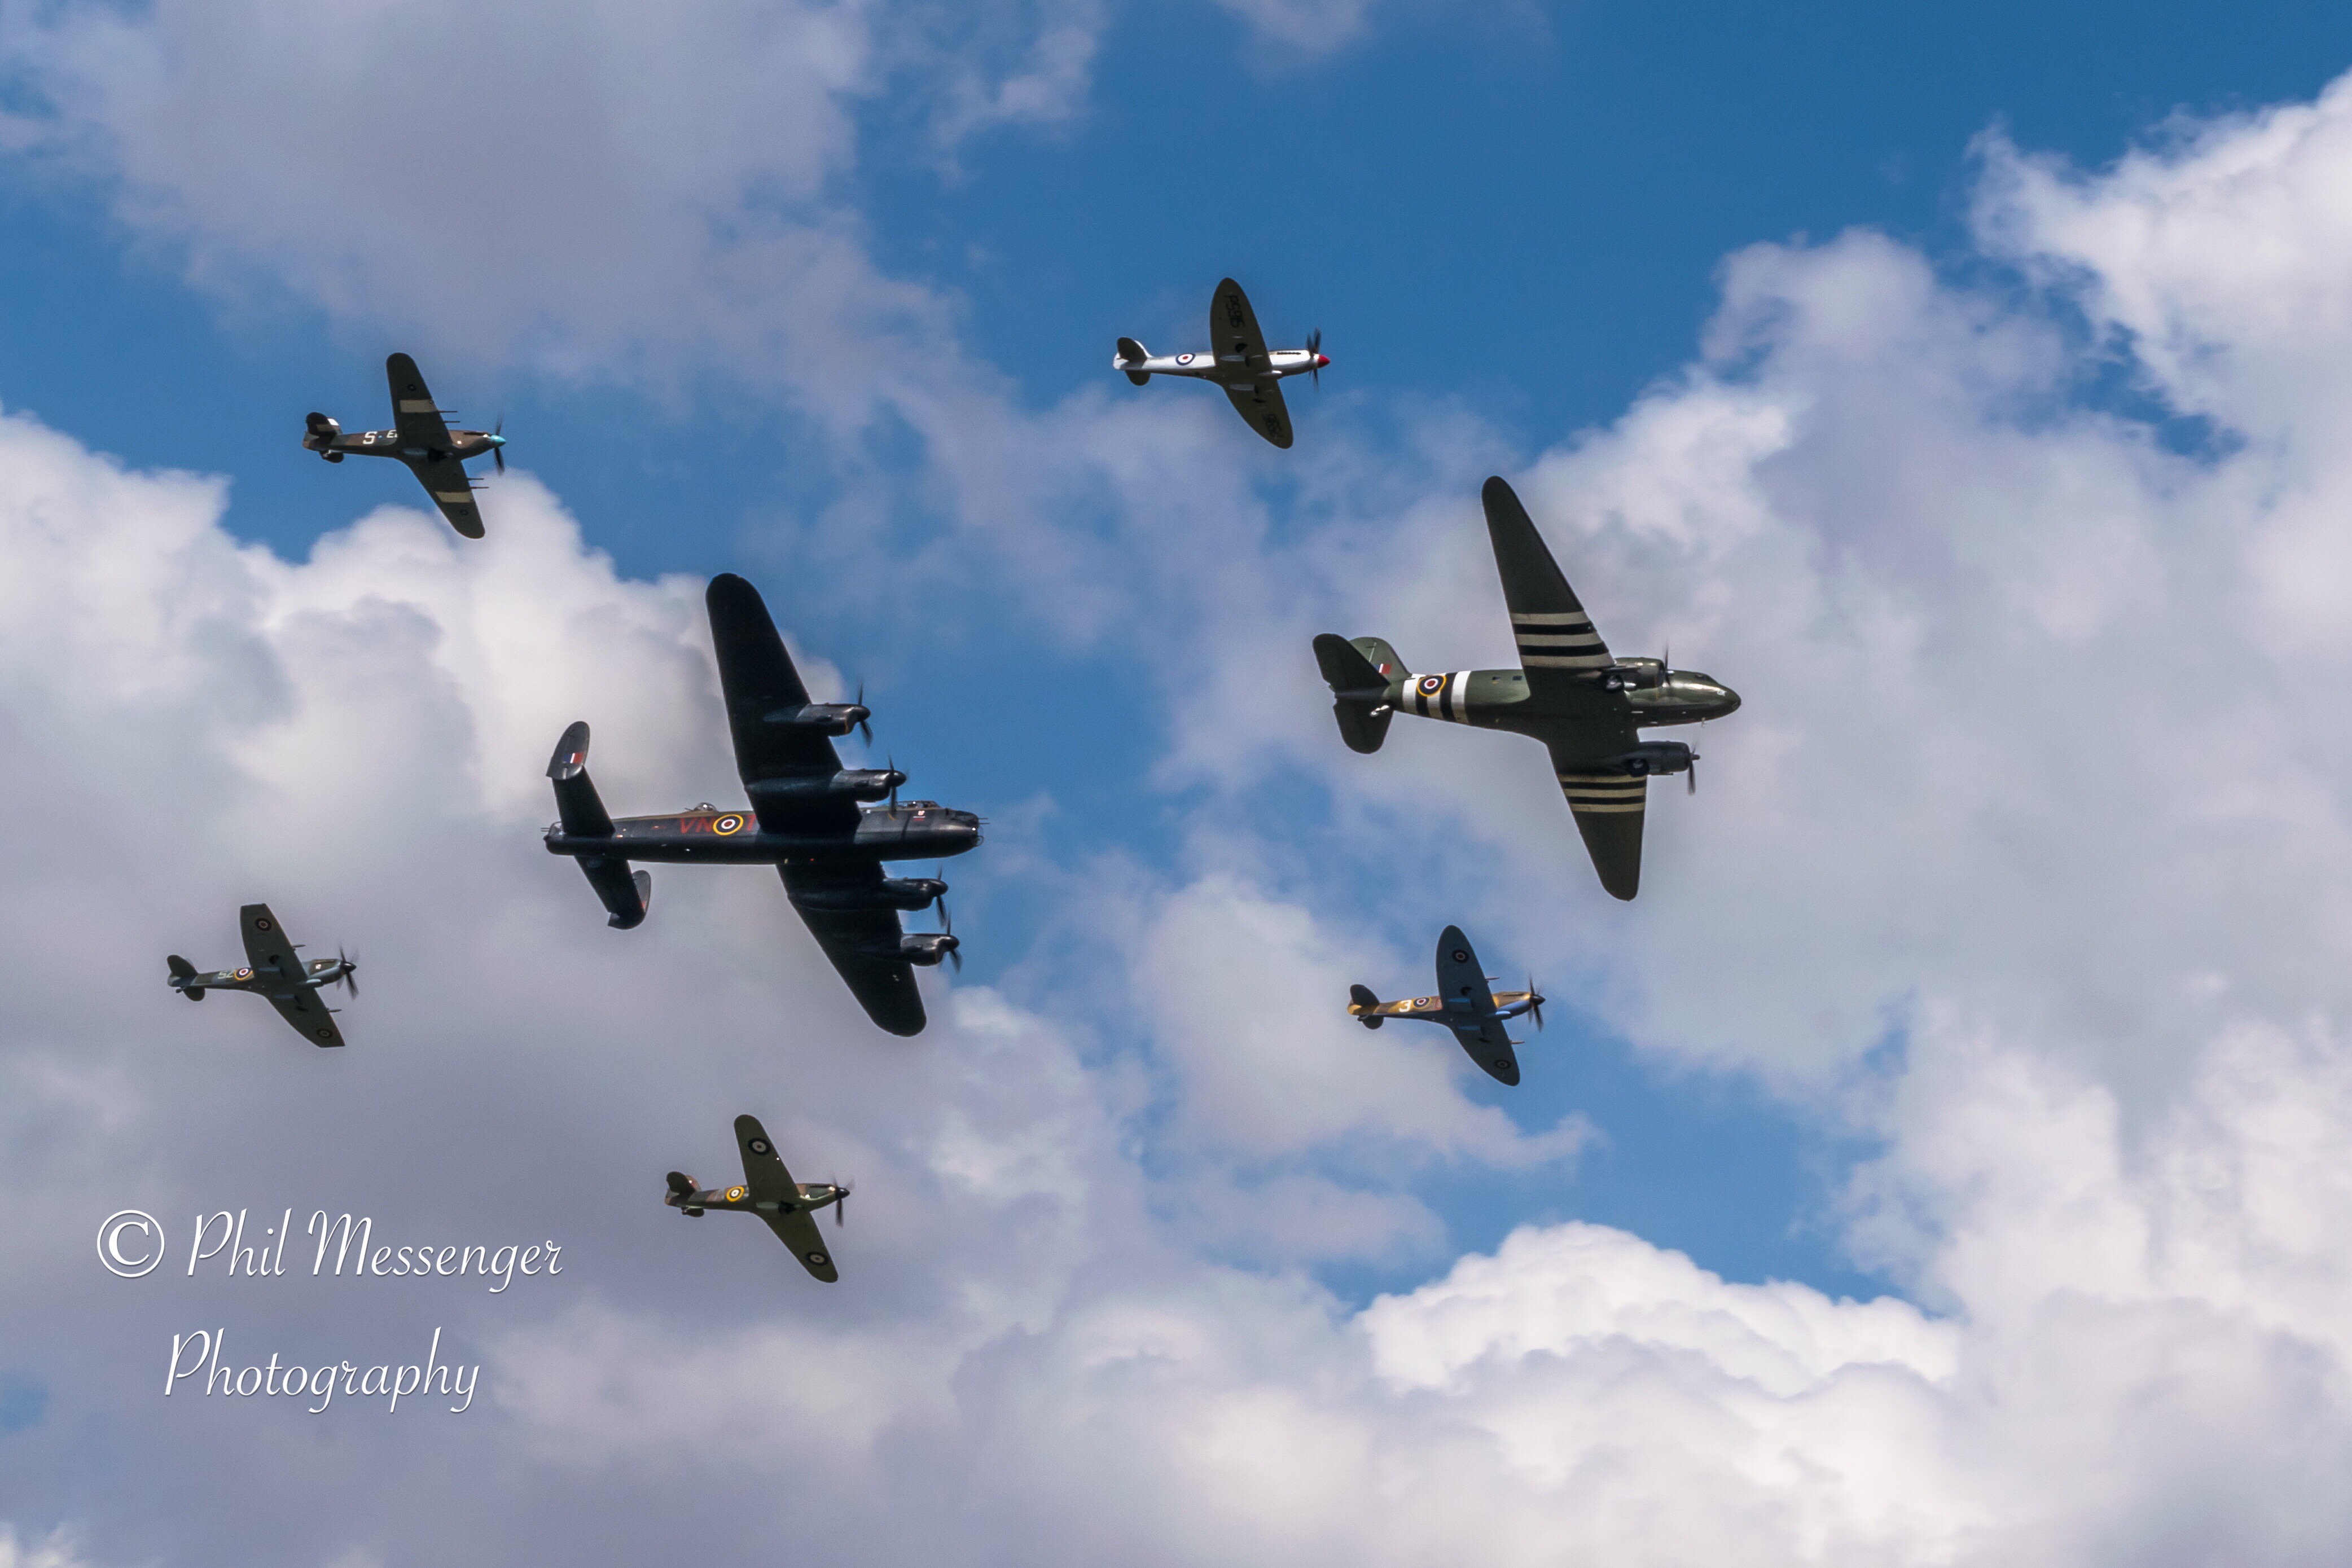 BBMF C-47 Dakota, Avro Lancaster, Spitfires and Hurricanes flying in Trenchard formation at the Royal International Air Tattoo, Fairford, England.